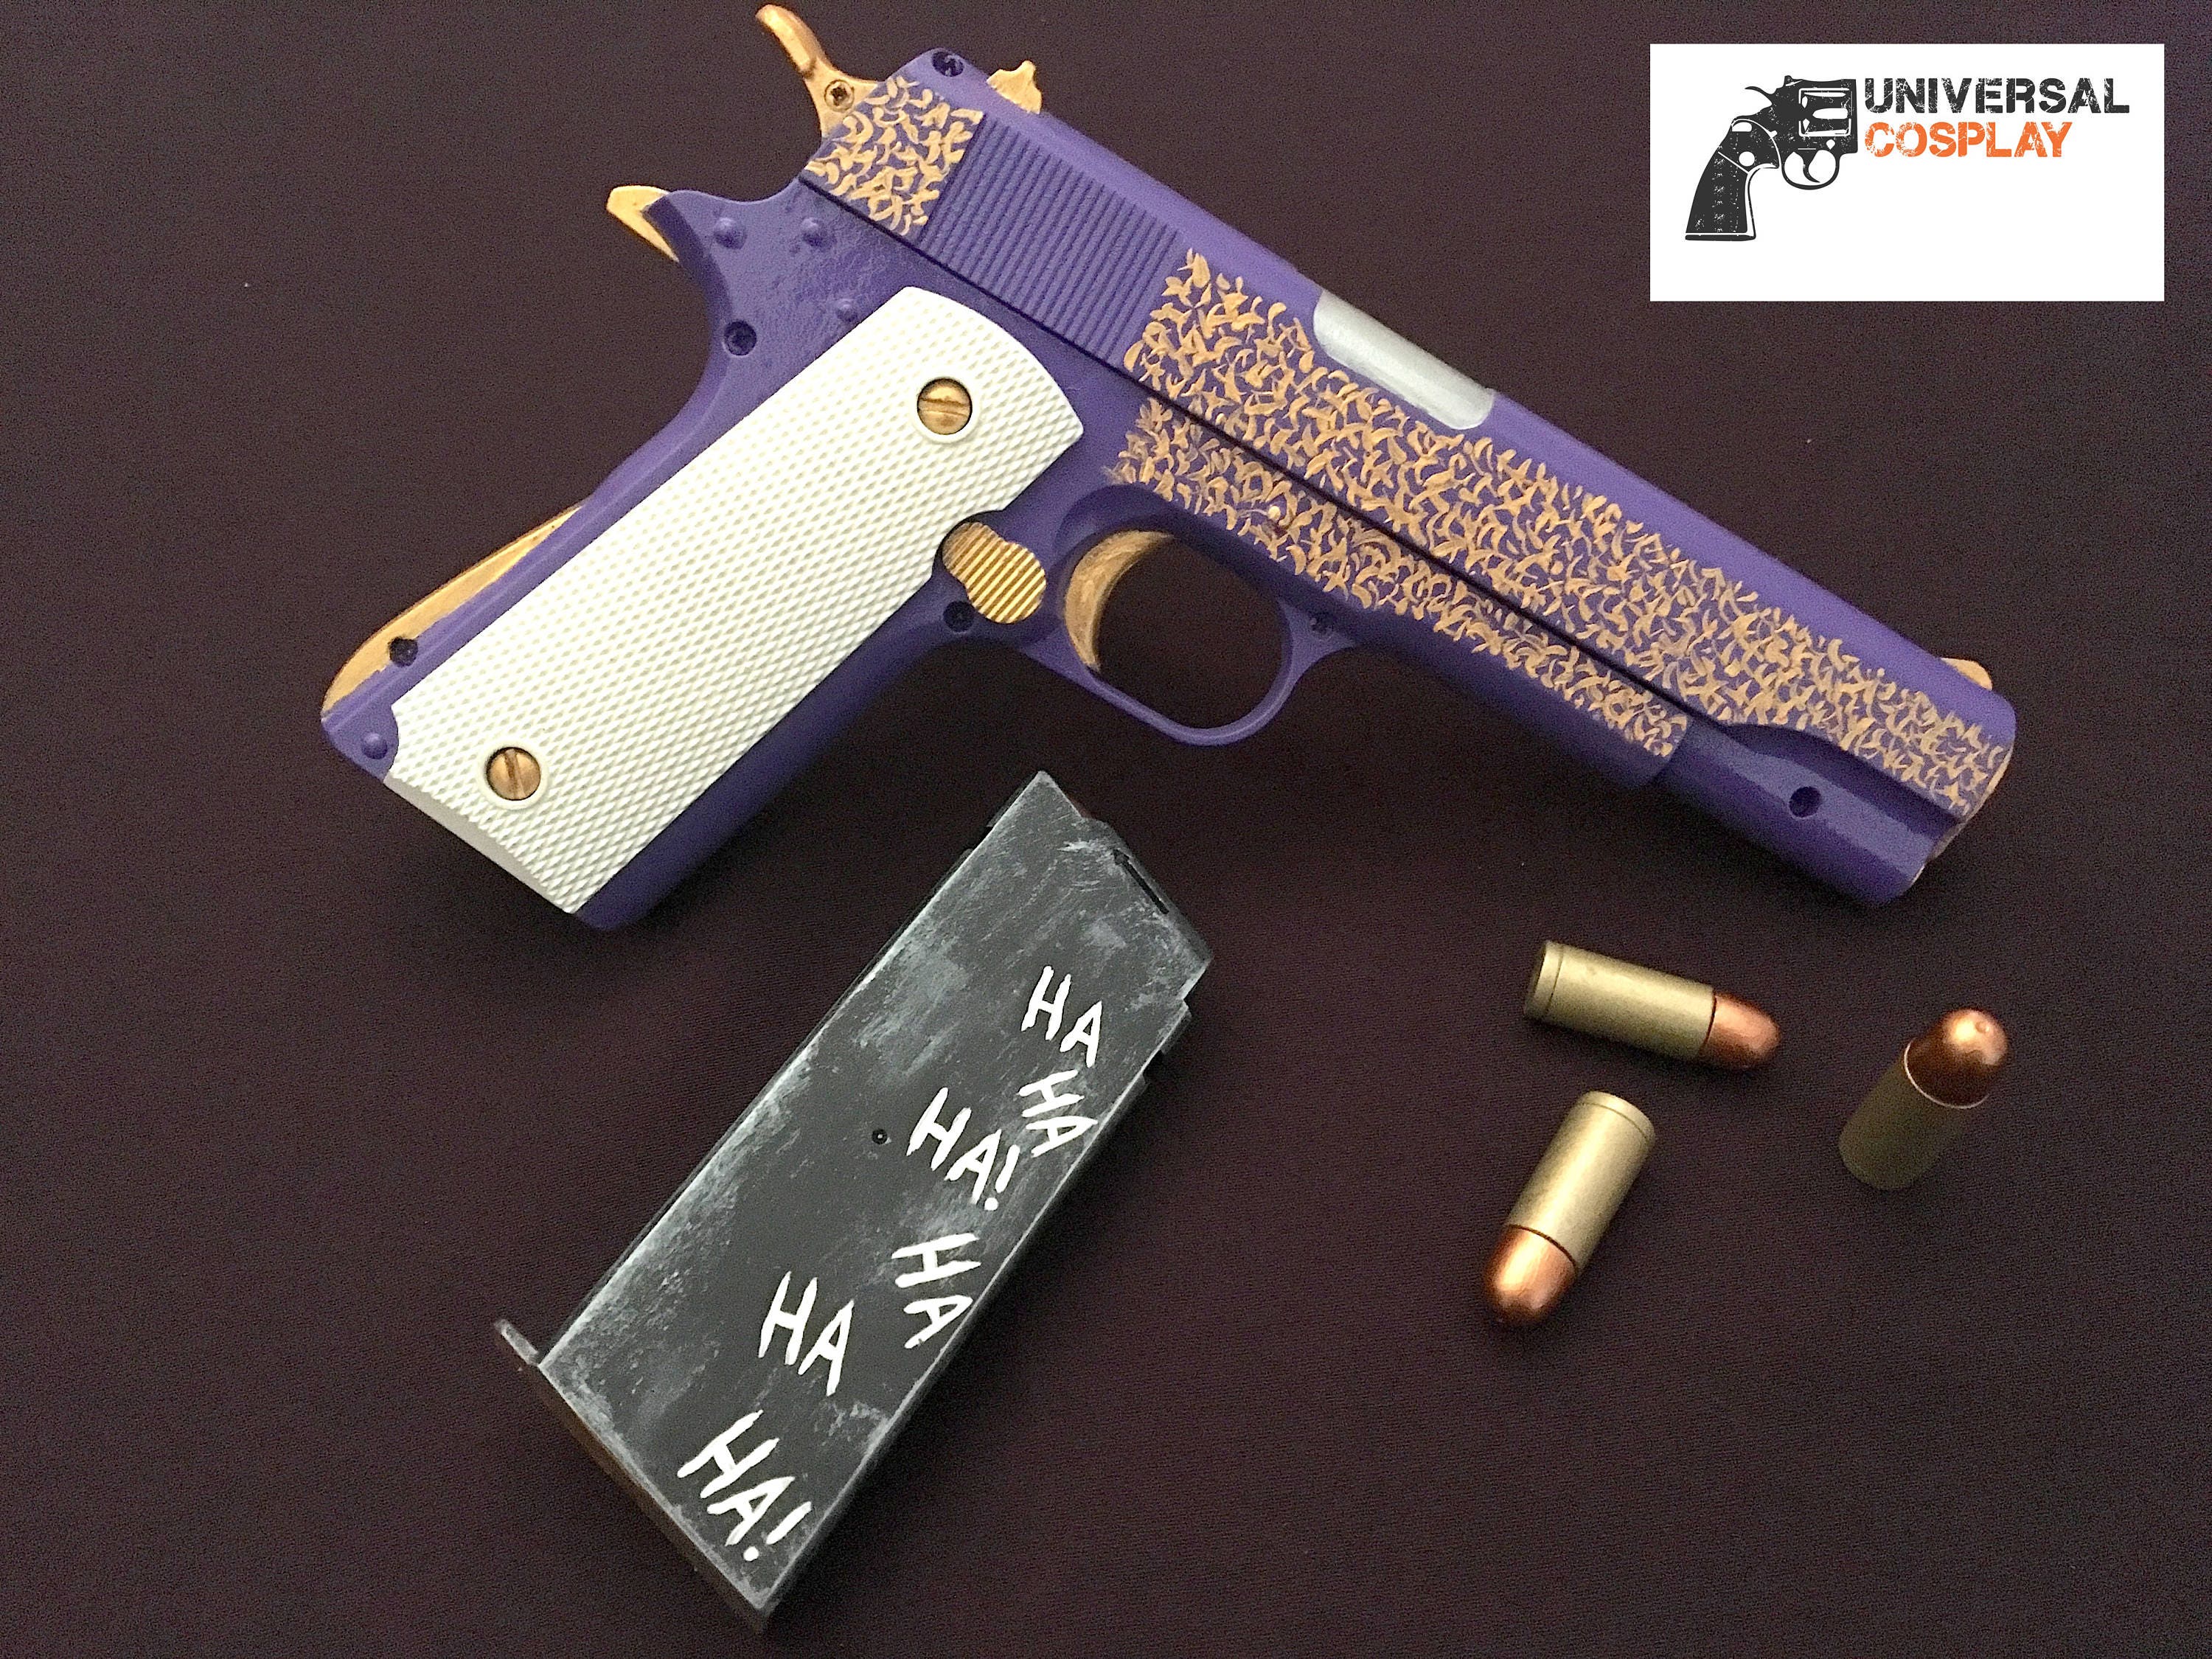 The Joker's M1911 Colt 45 Pistol from Suicide Squad